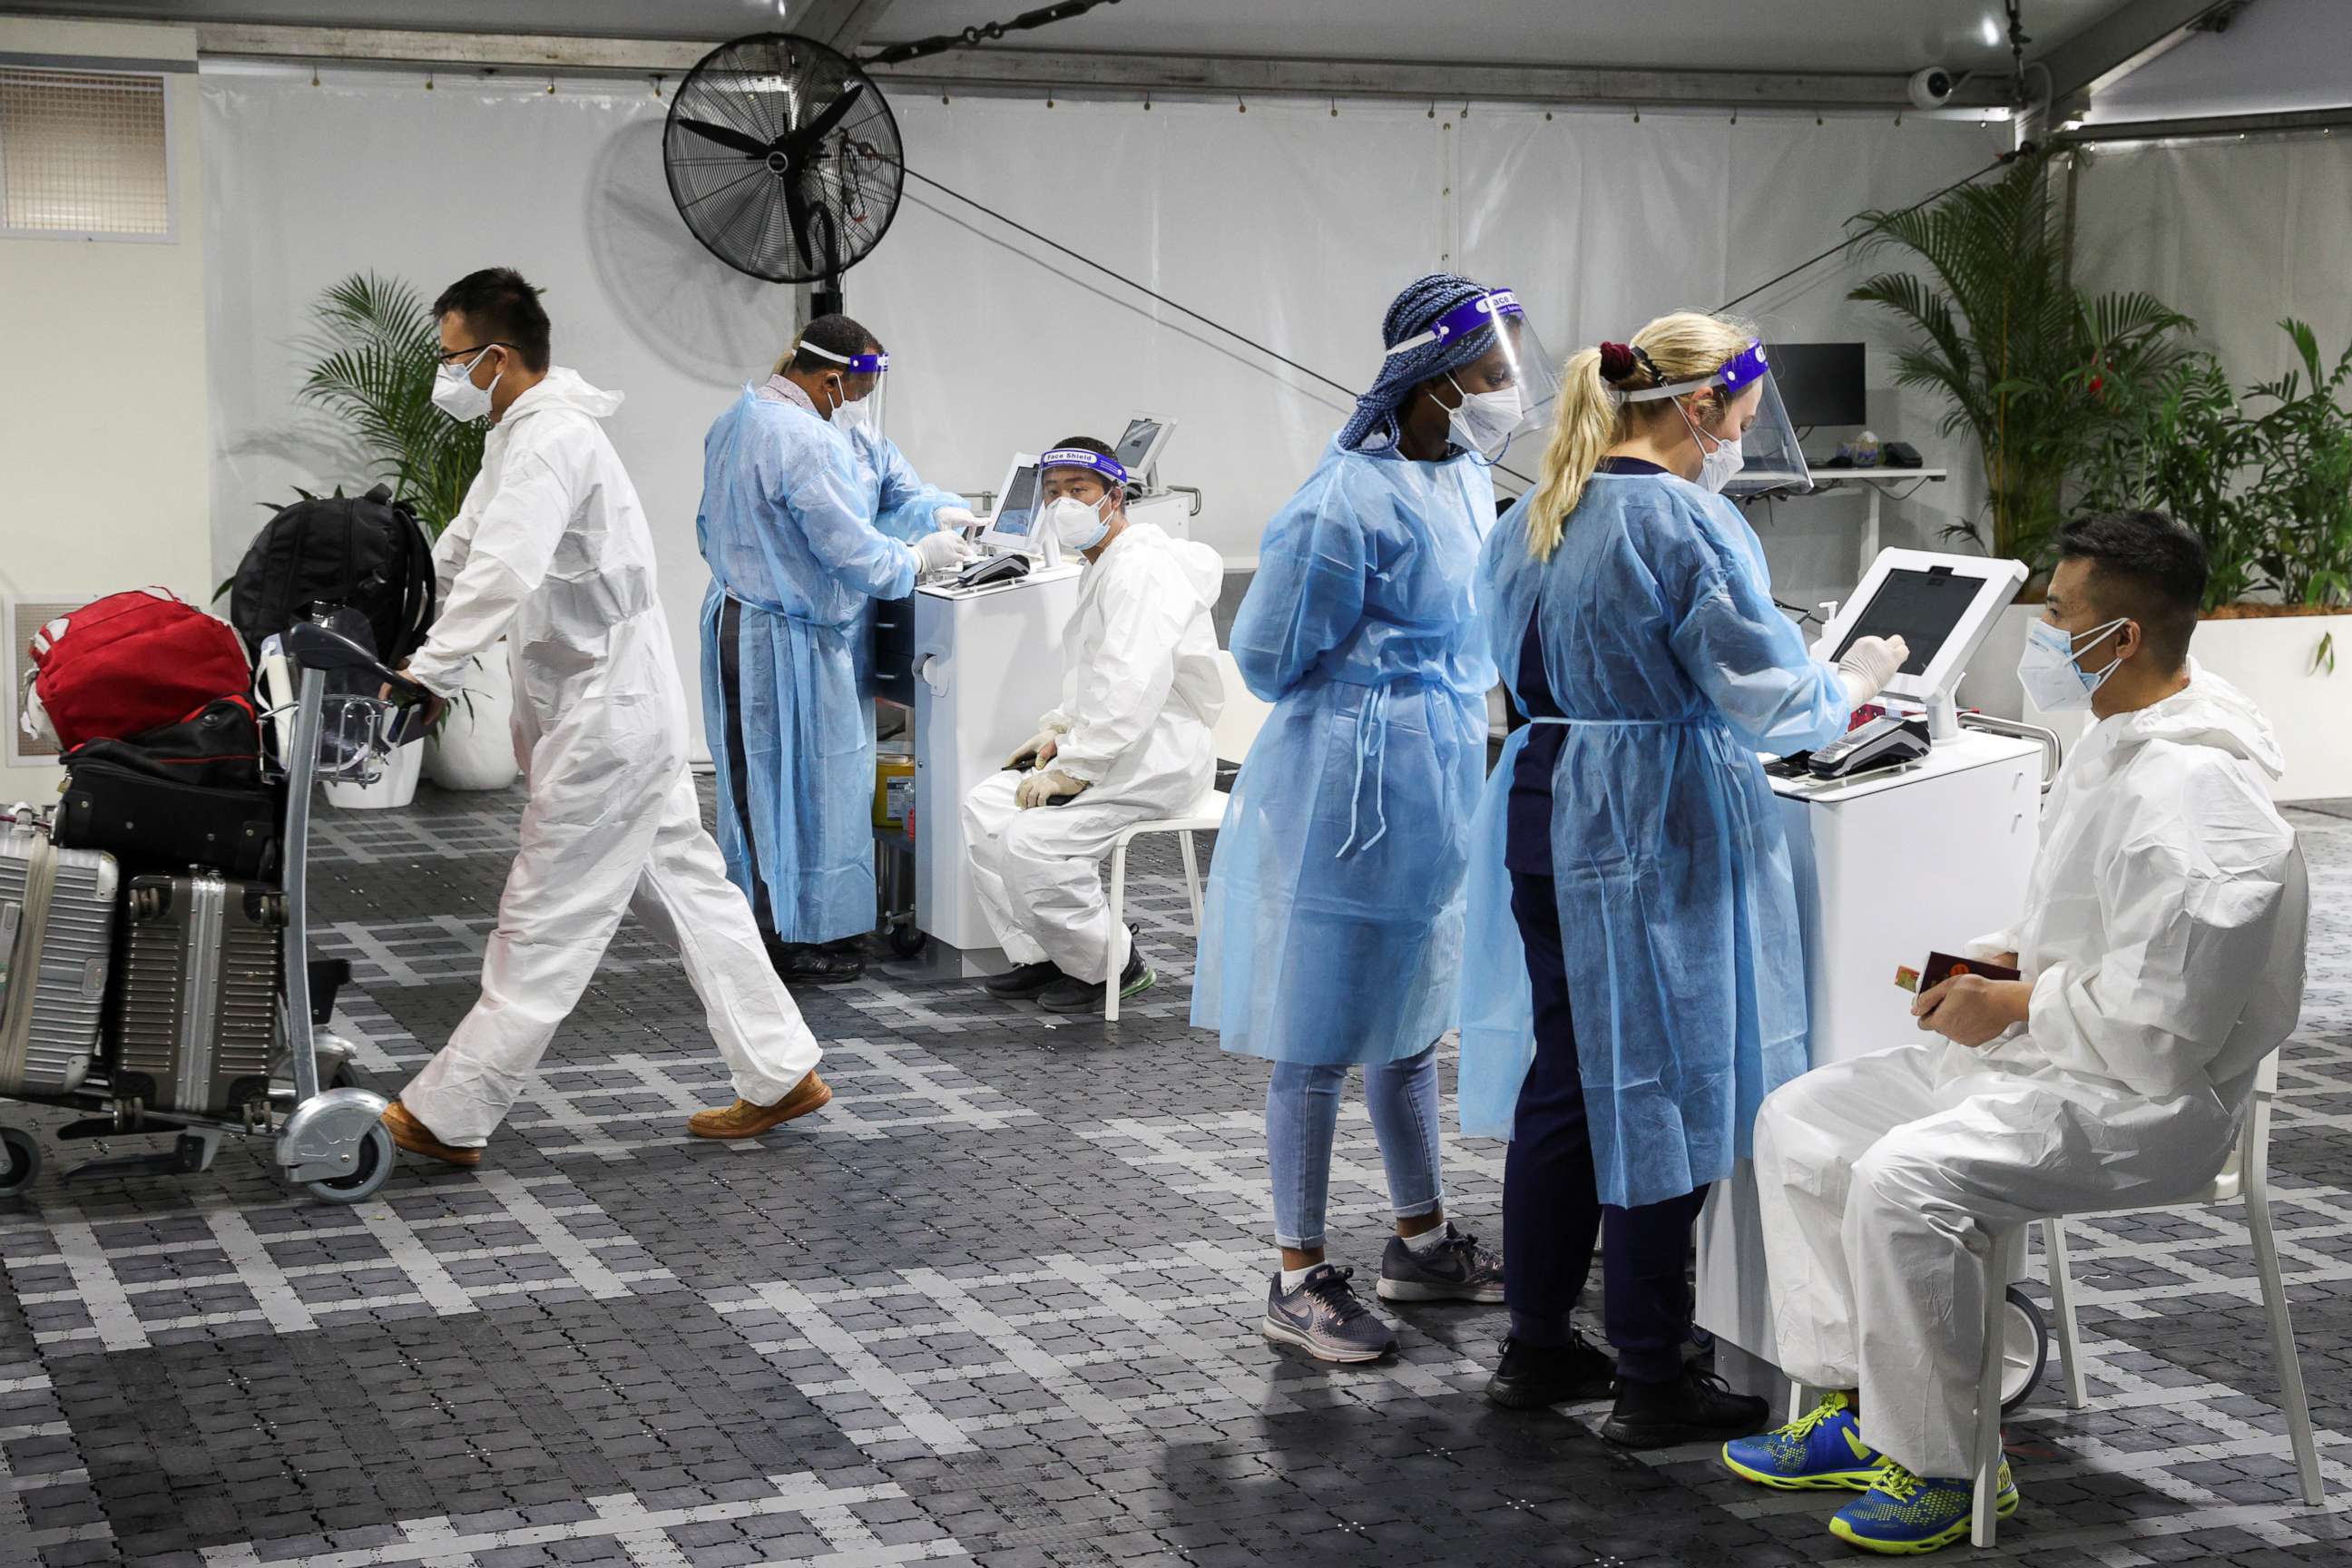 PHOTO: Travelers get tested for COVID-19 at a pre-departure testing facility outside the international terminal at Sydney Airport in Sydney, Australia, on Nov. 29, 2021, as countries react to the new omicron variant.